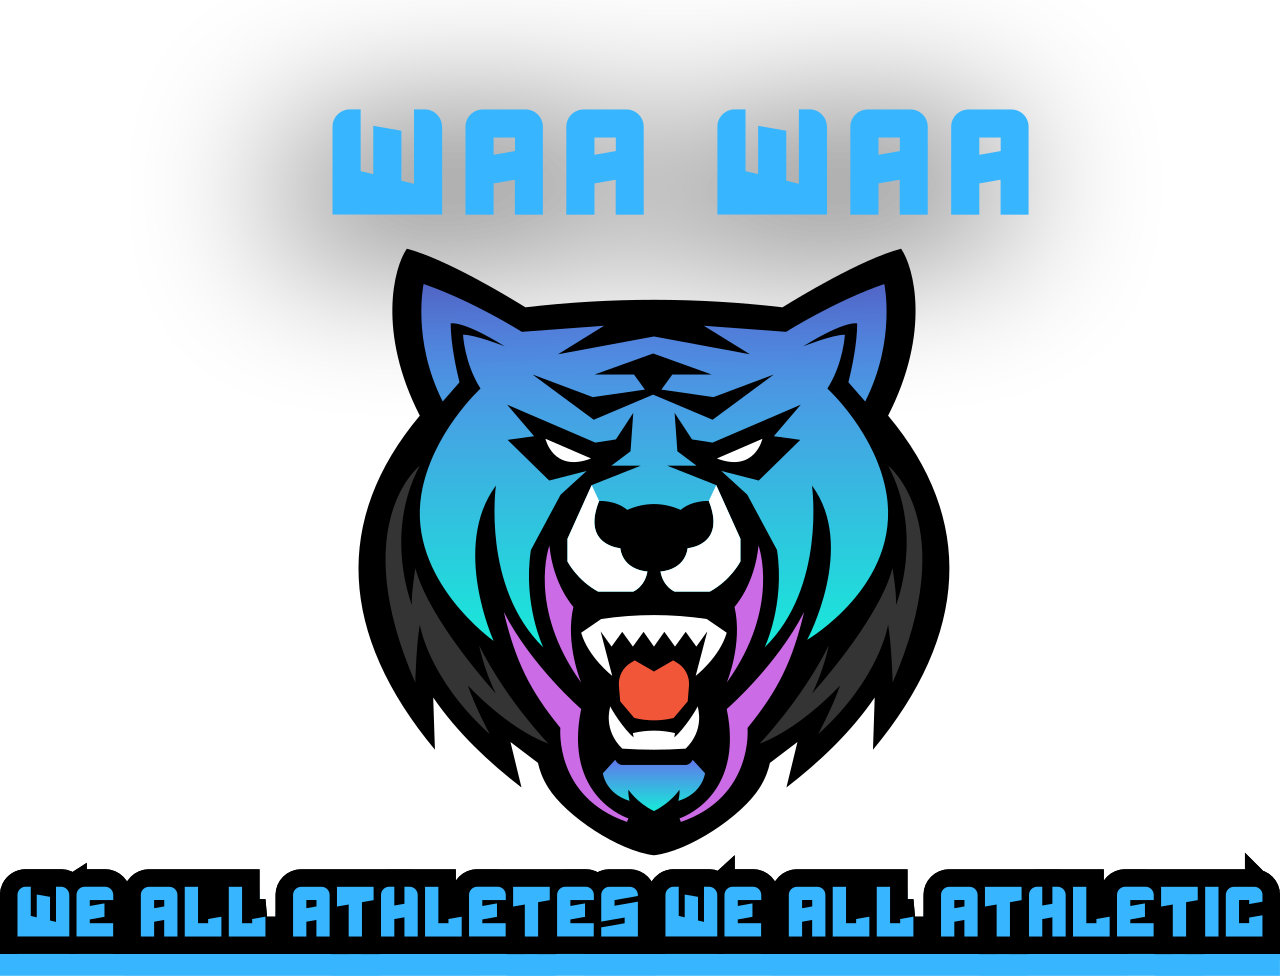 We all athletes we all athletic 's web page